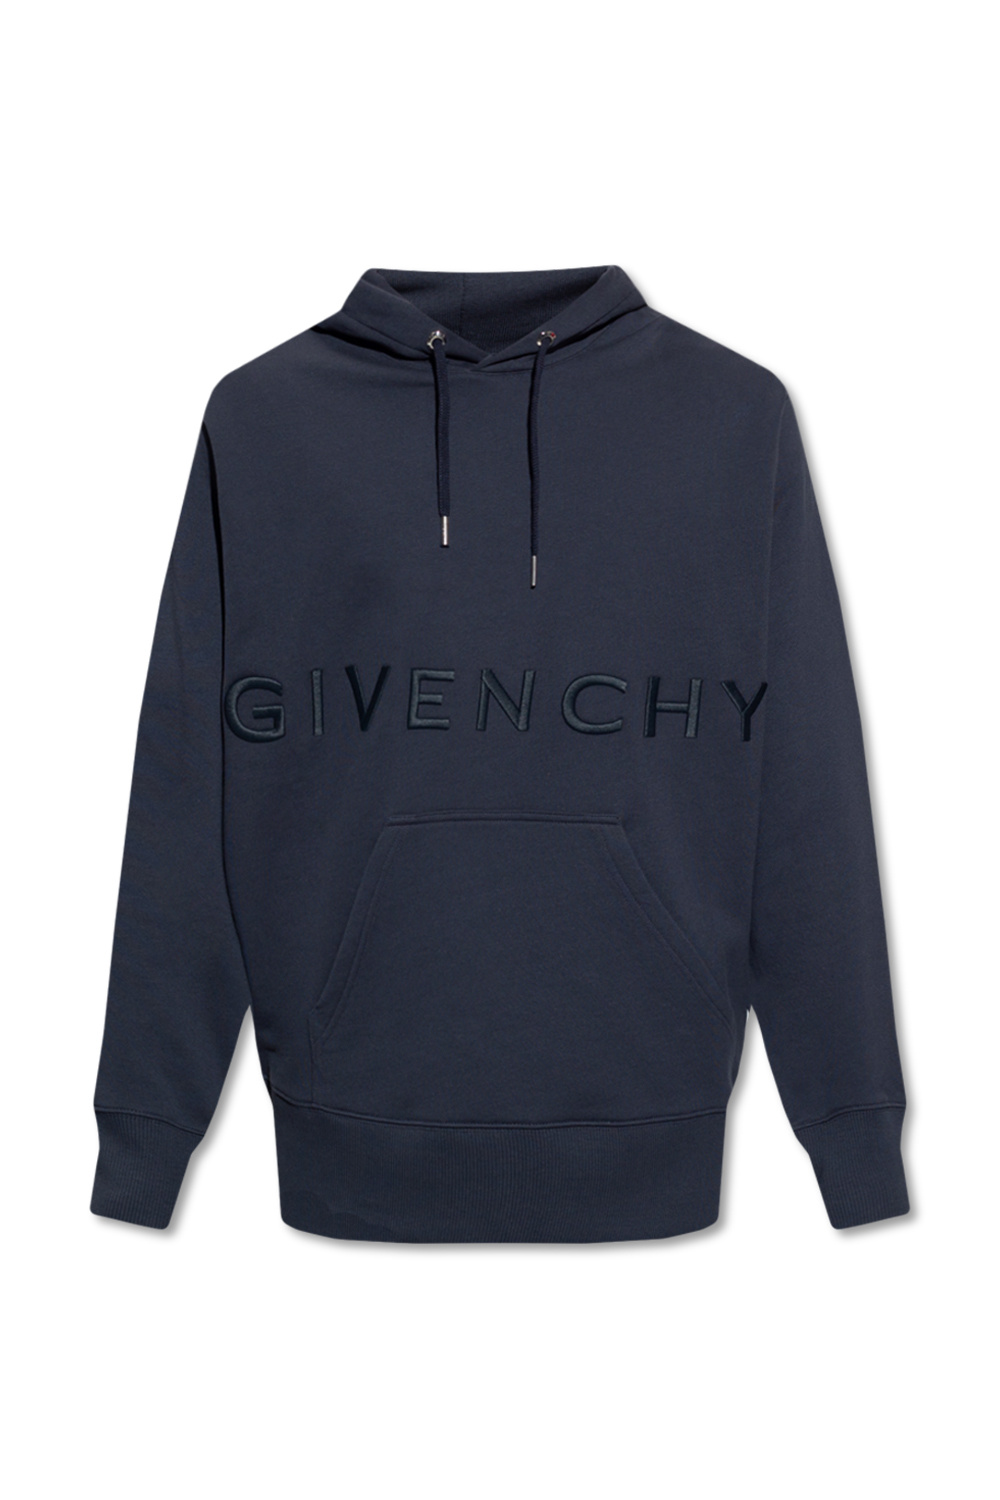 Givenchy Hoodie with logo | Men's Clothing | Vitkac